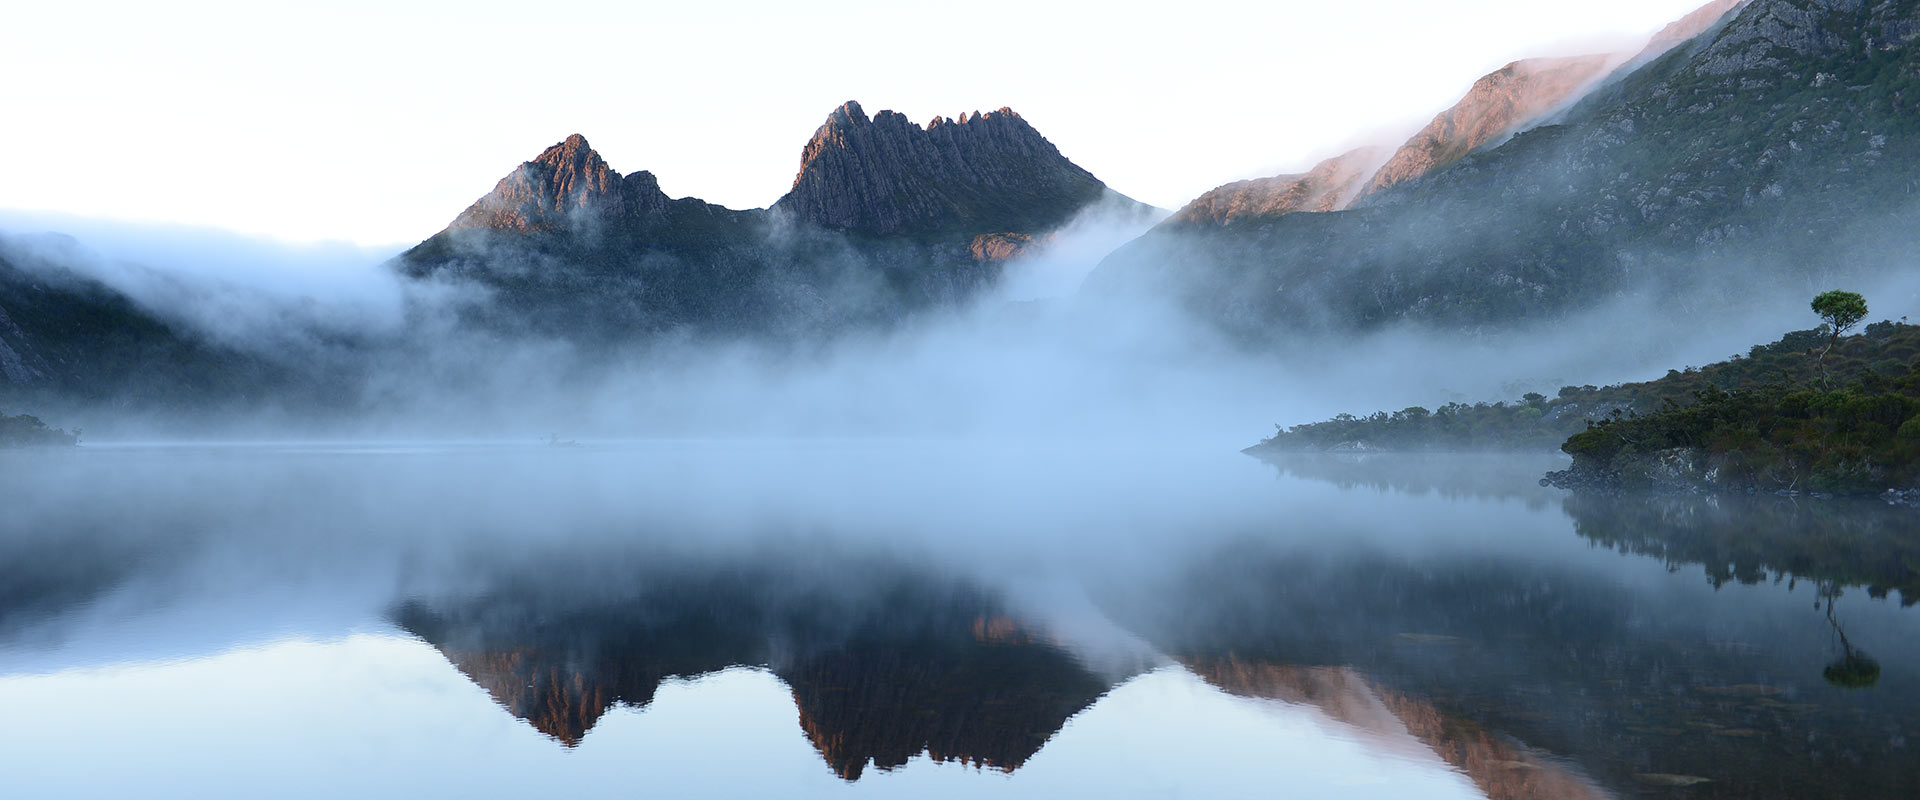 View of mountains and lake covered my misty fog, Tasmania